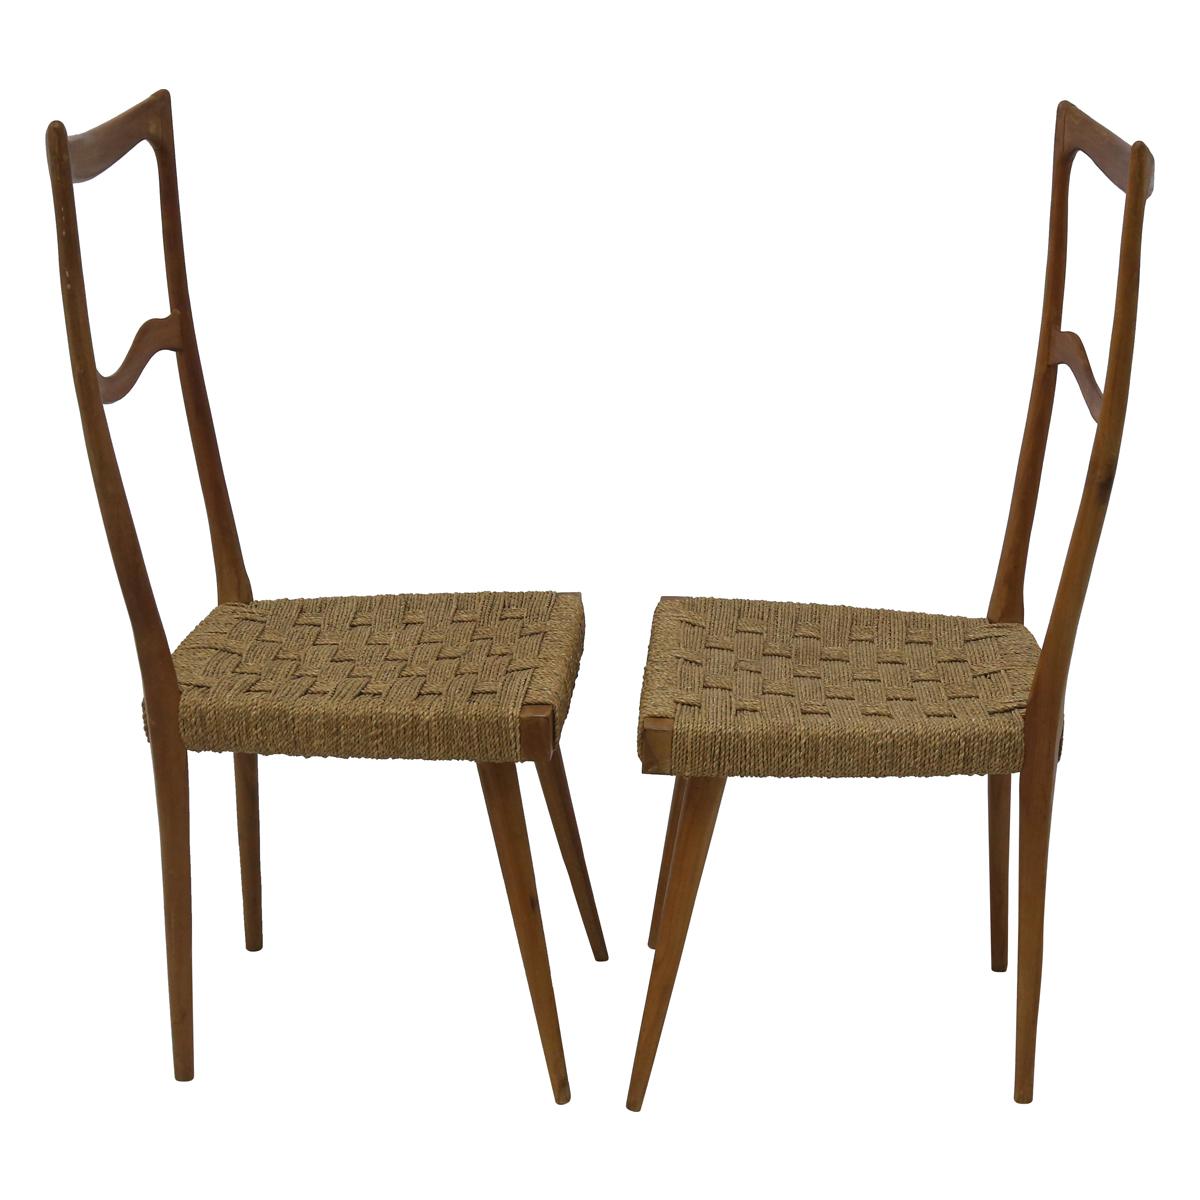 Mid-20th Century Set of 4 Italian Ladder Back Chairs in the Manner of Gio Ponti